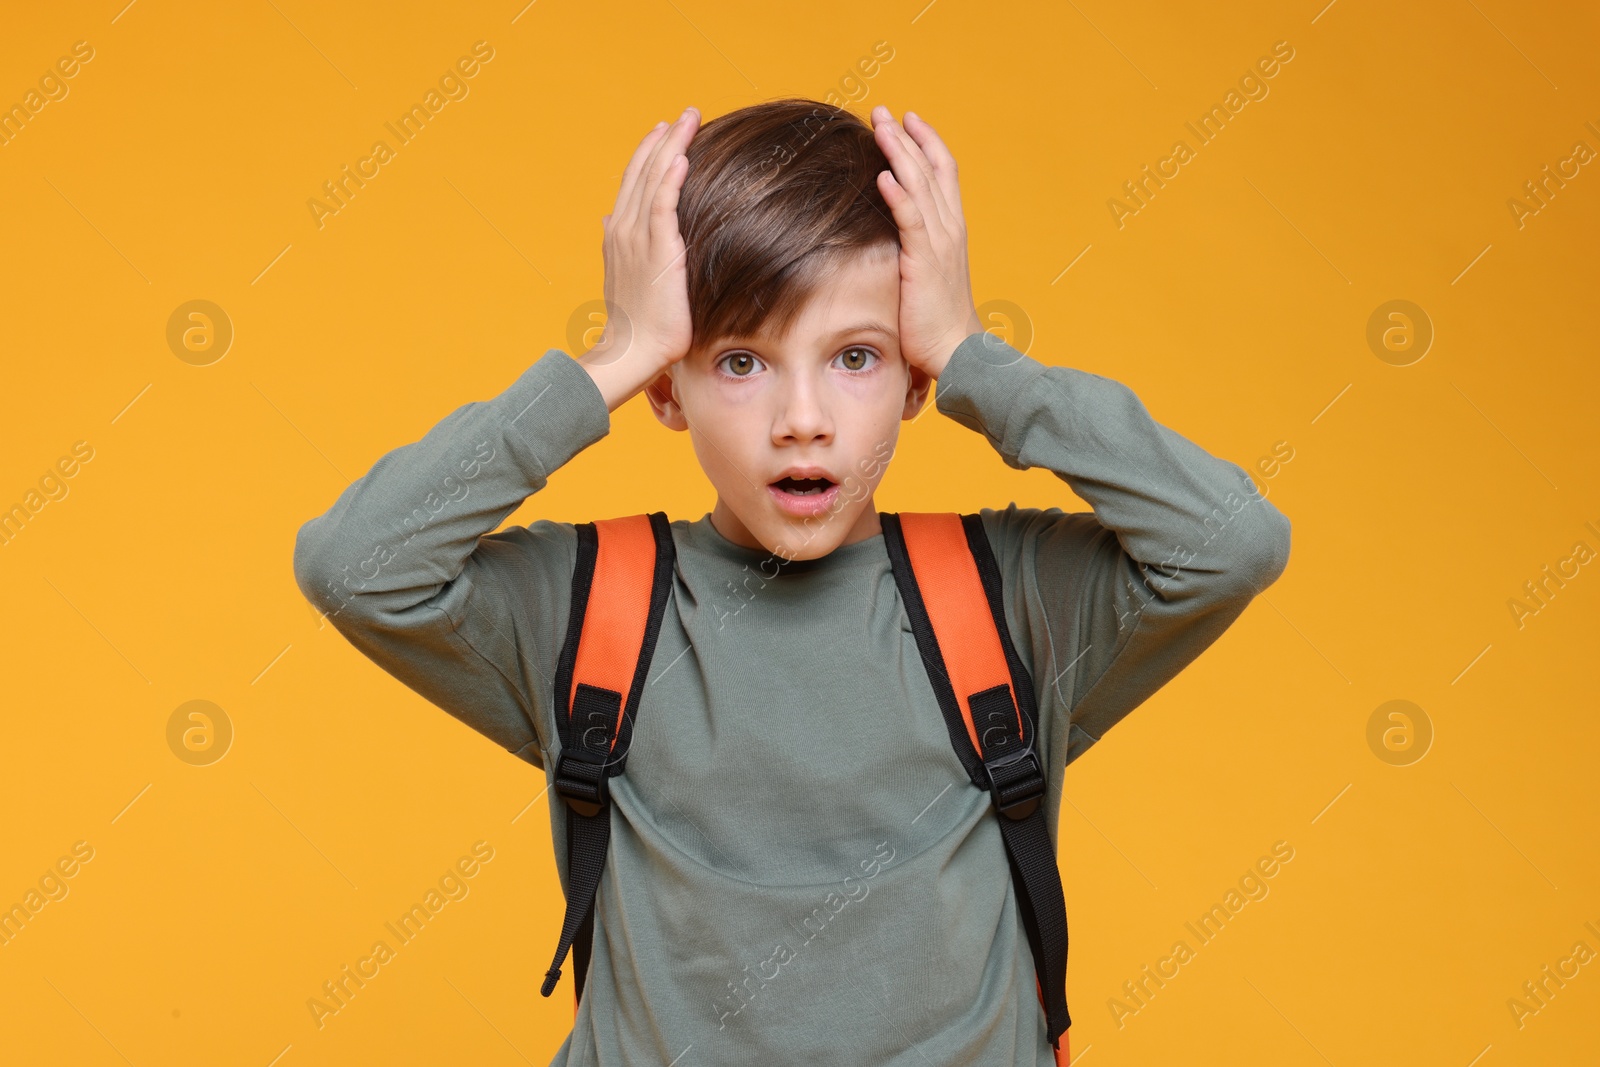 Photo of Surprised schoolboy covering head with hands on orange background